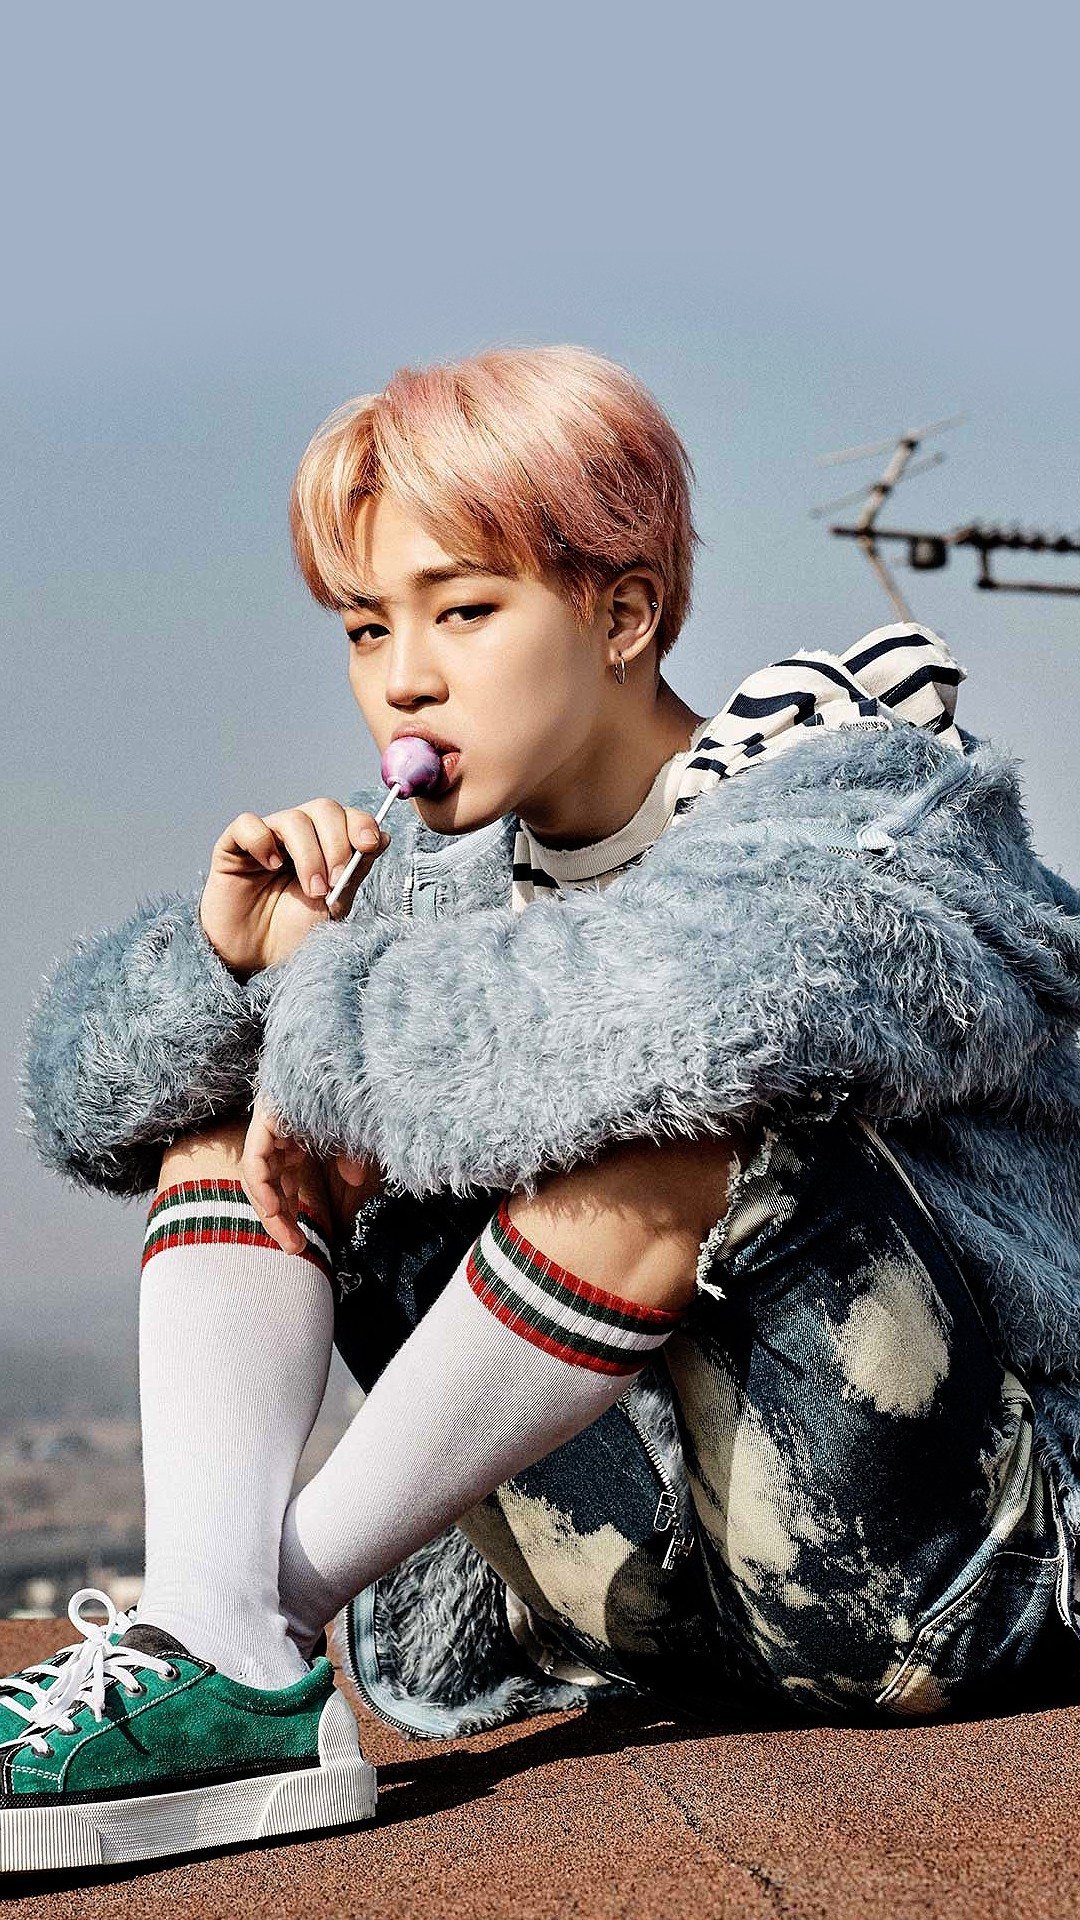 BTS Jimin Selected as 'Asia's Representative Handsome' by Japanese media